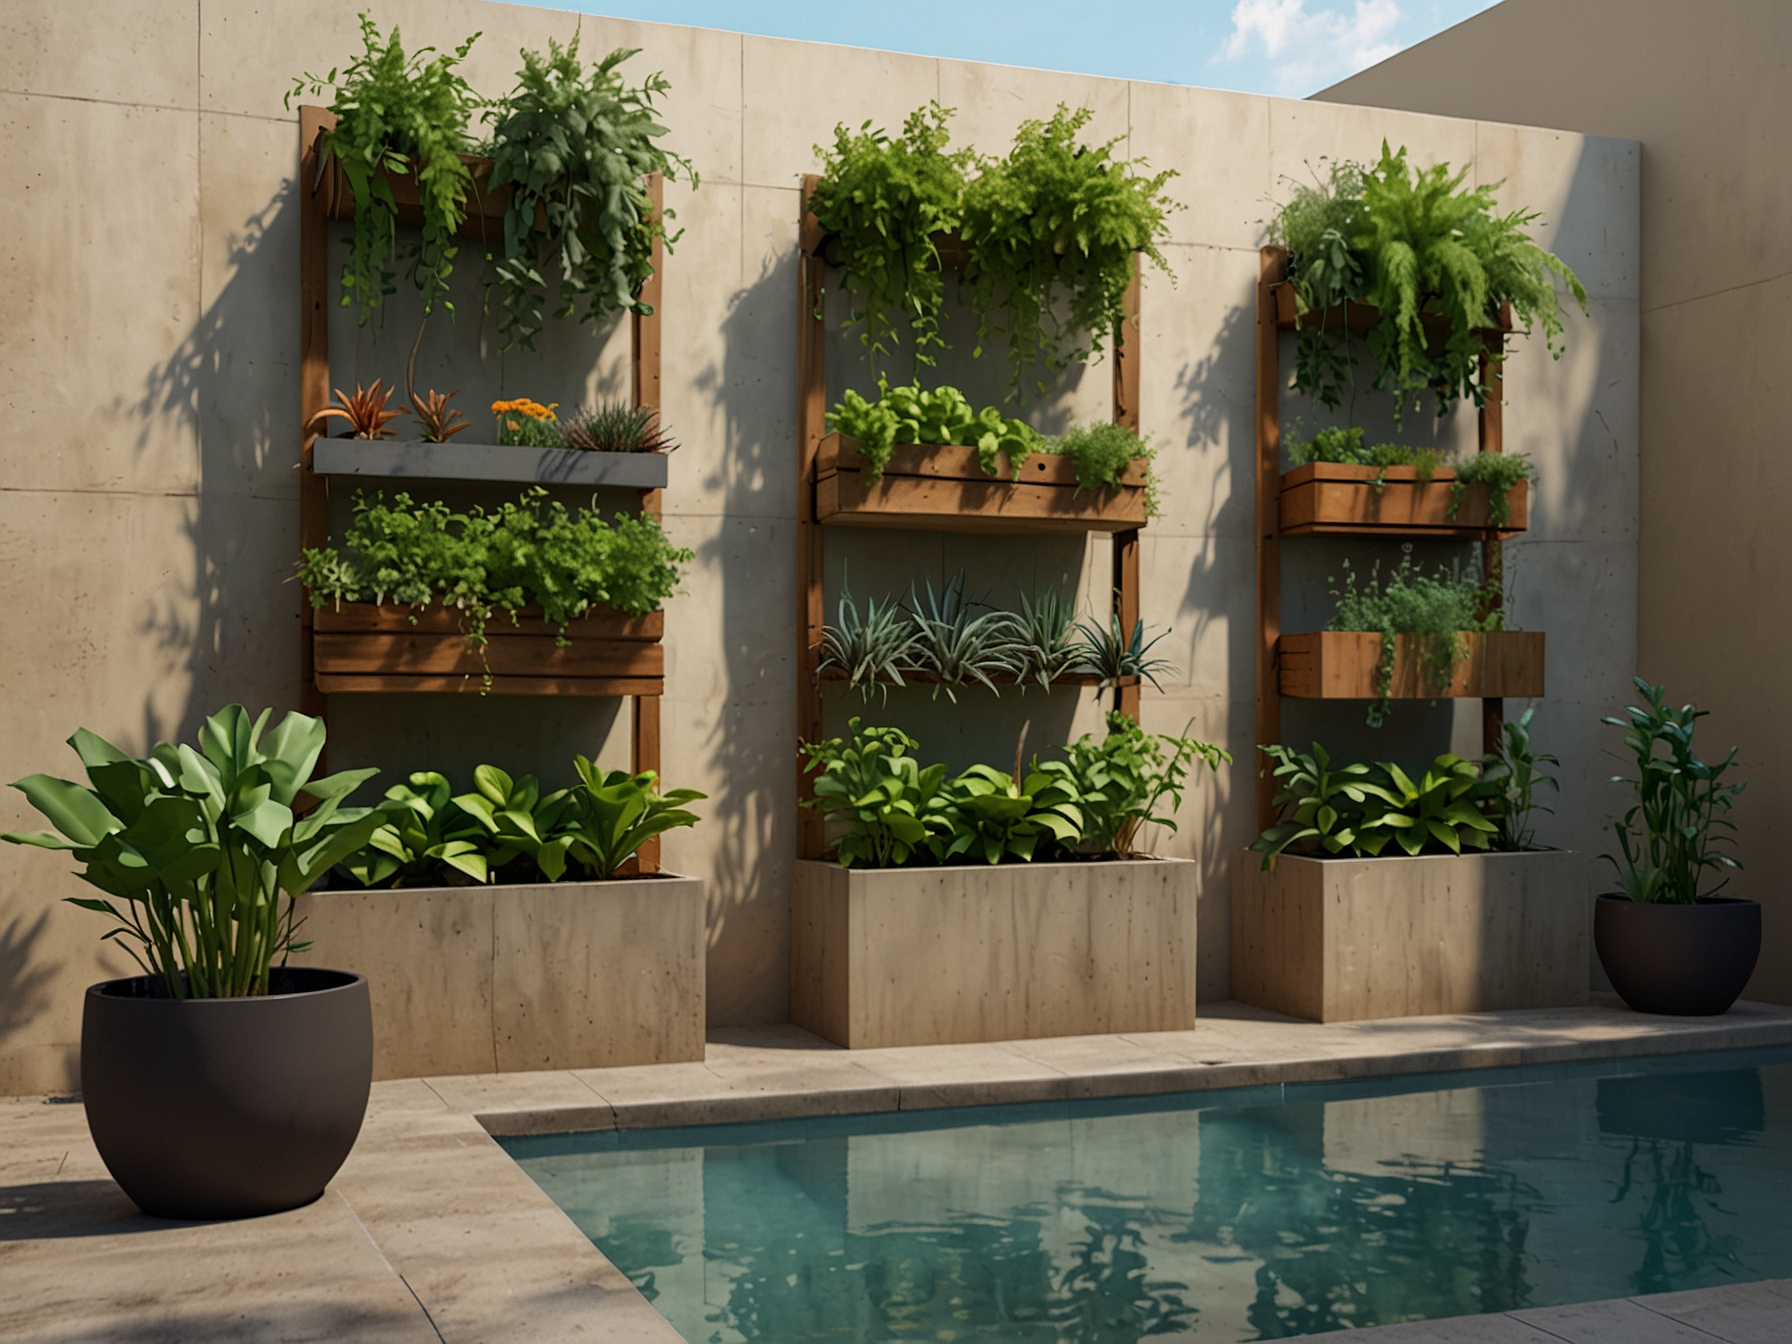 An urban garden with vertical wall-mounted planters for herbs and vegetables, a small water feature doubling as a bird bath, showcasing functional beauty with lush greenery and practical design.